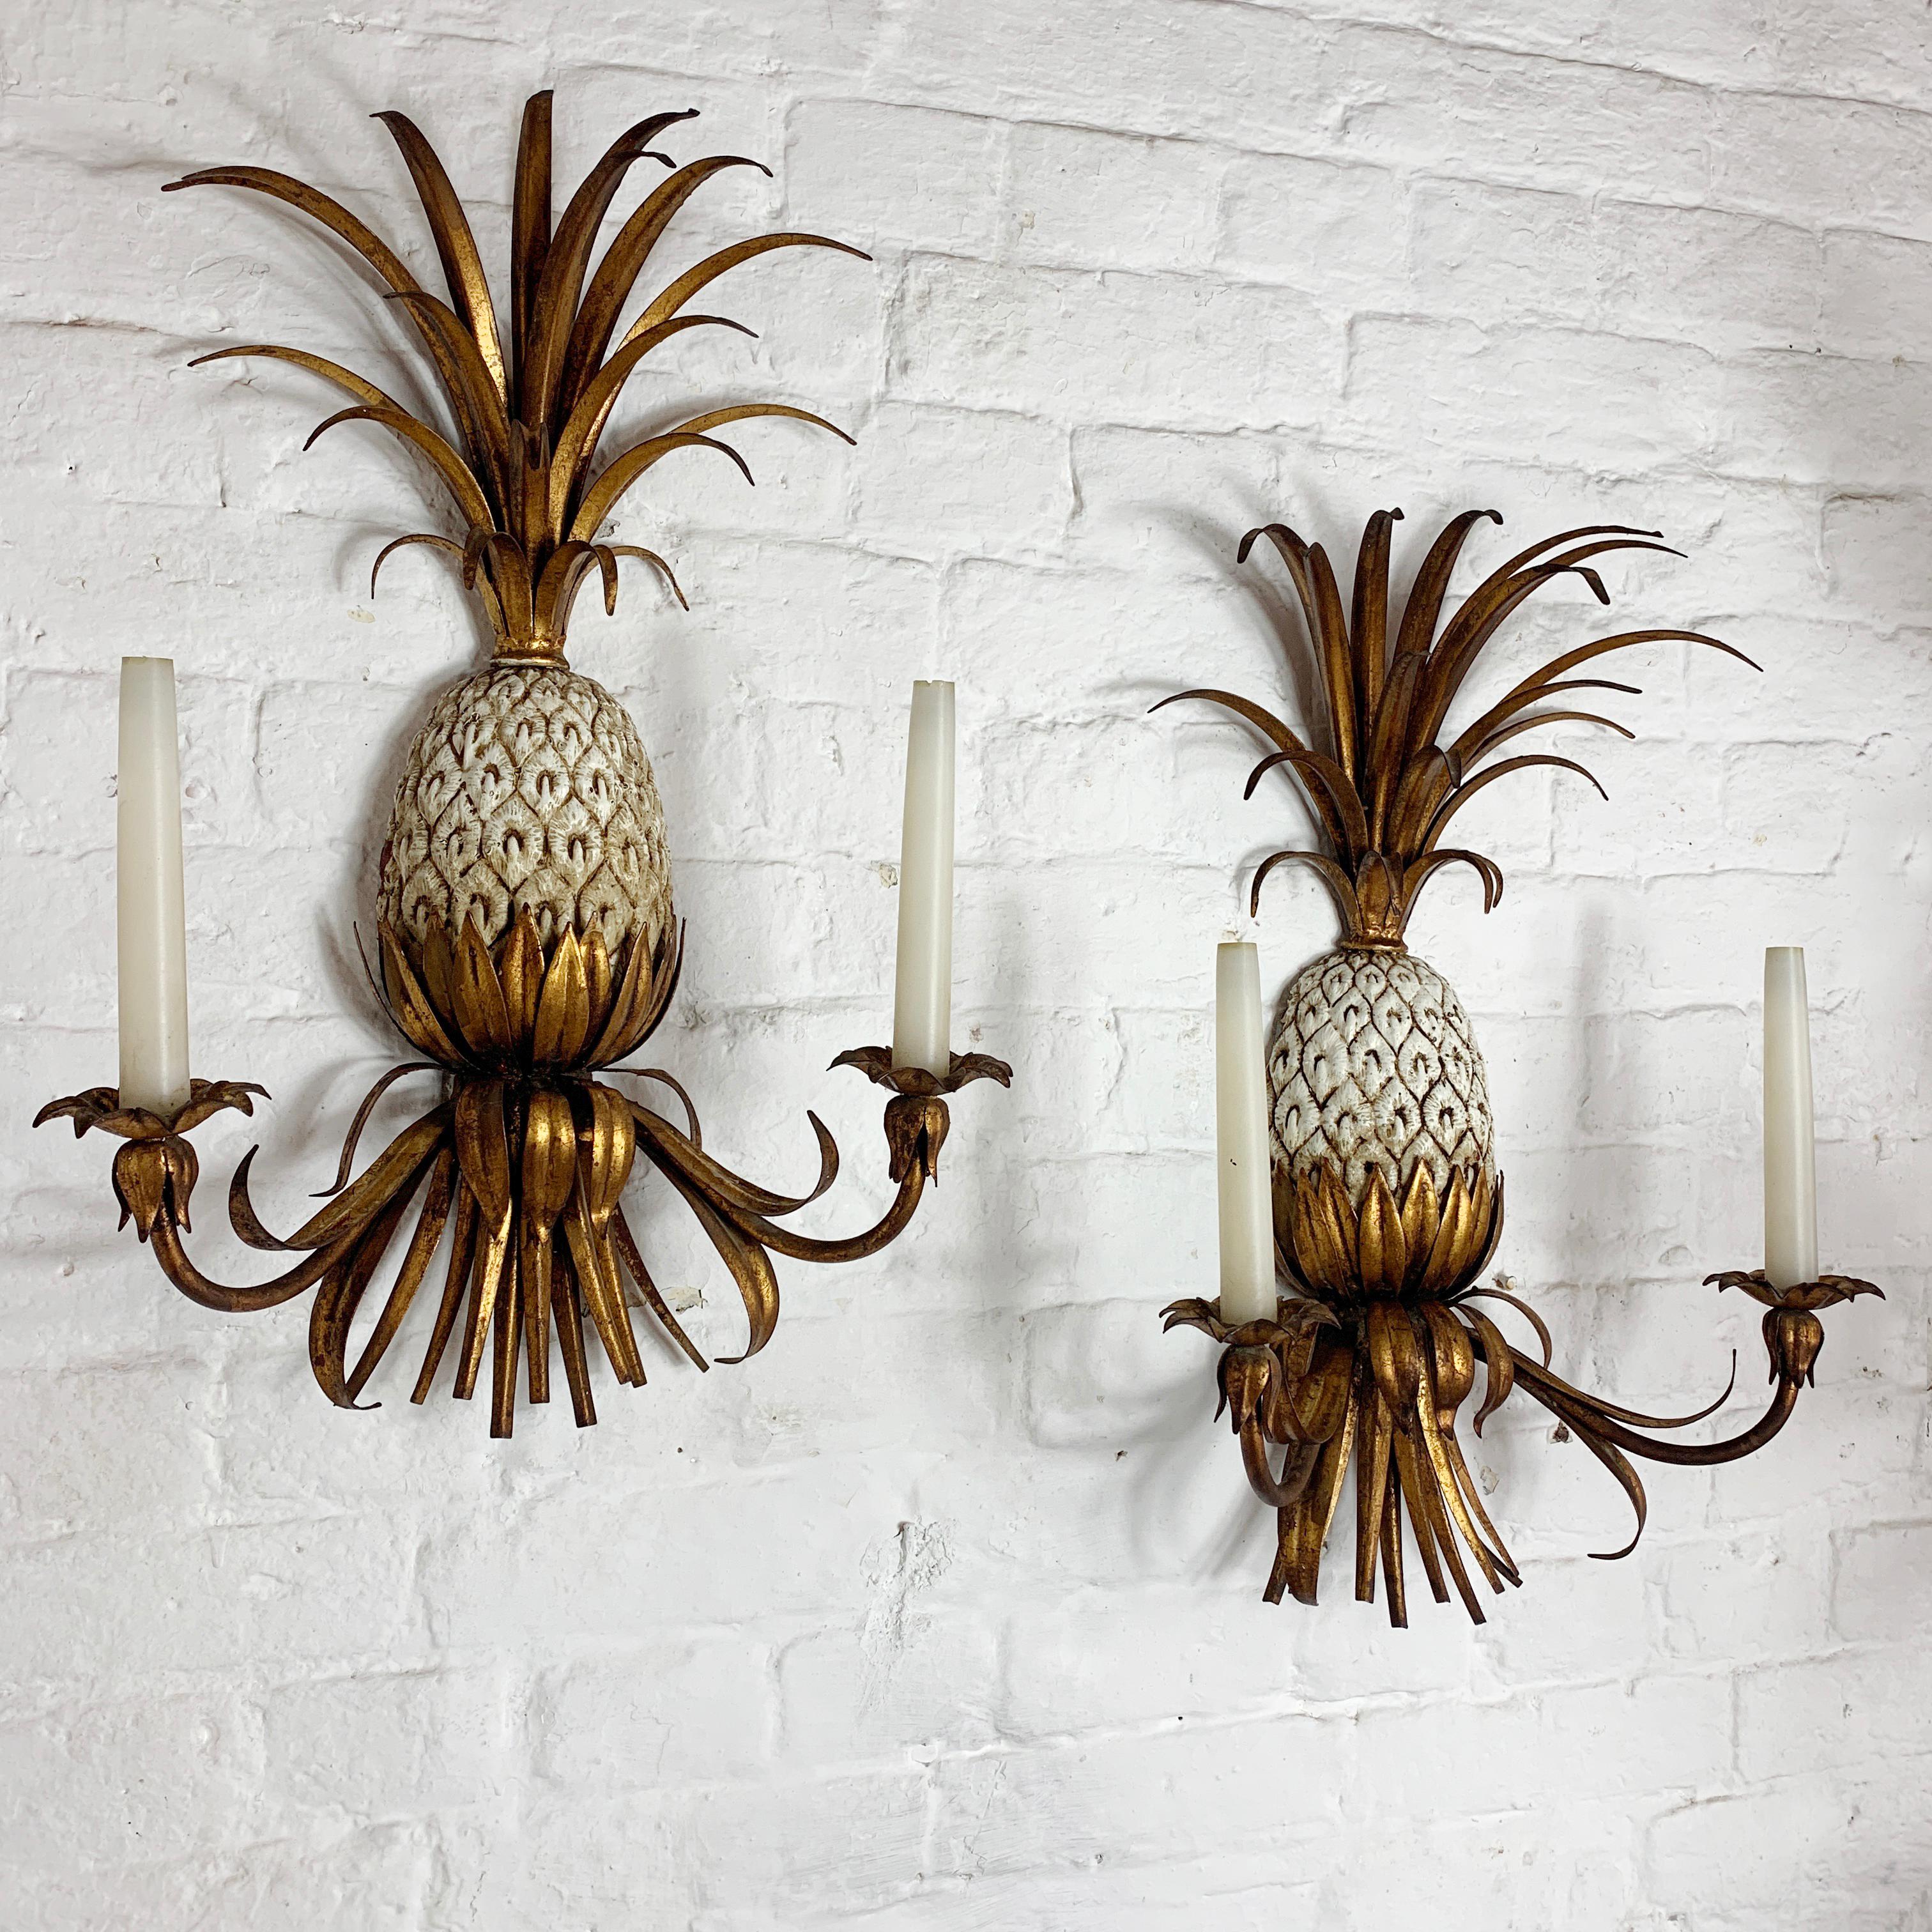 Stunning pair of gilt tole ware pineapple wall sconce's
Italian
circa 1950s-1960s
The central pineapple is metal and in cream color with gold highlights
The fronds are large and full
The lights have 2 bulb holders each, they take a small E10